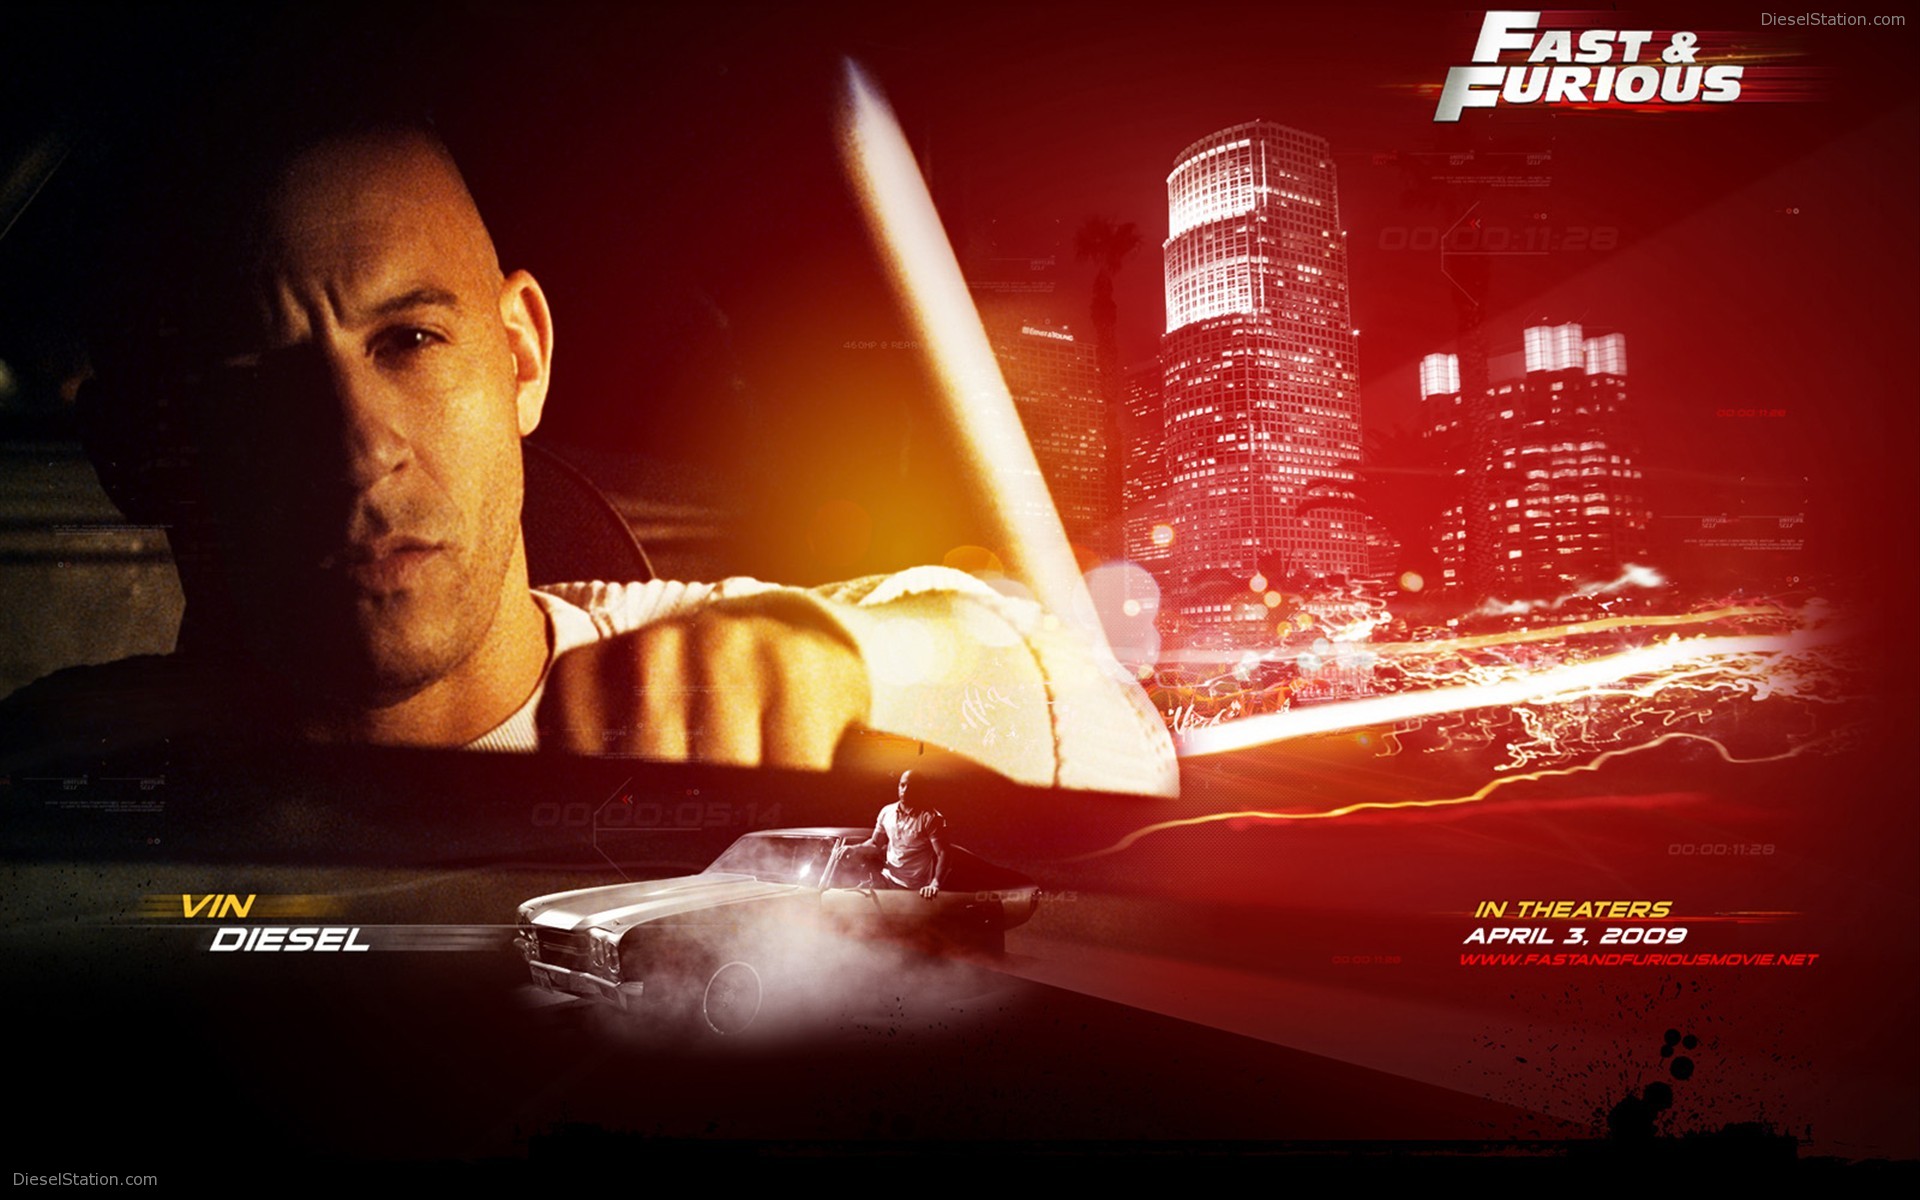 Fast & Furious 4 Hd Trailer - Fast And The Furious 4 Poster - HD Wallpaper 